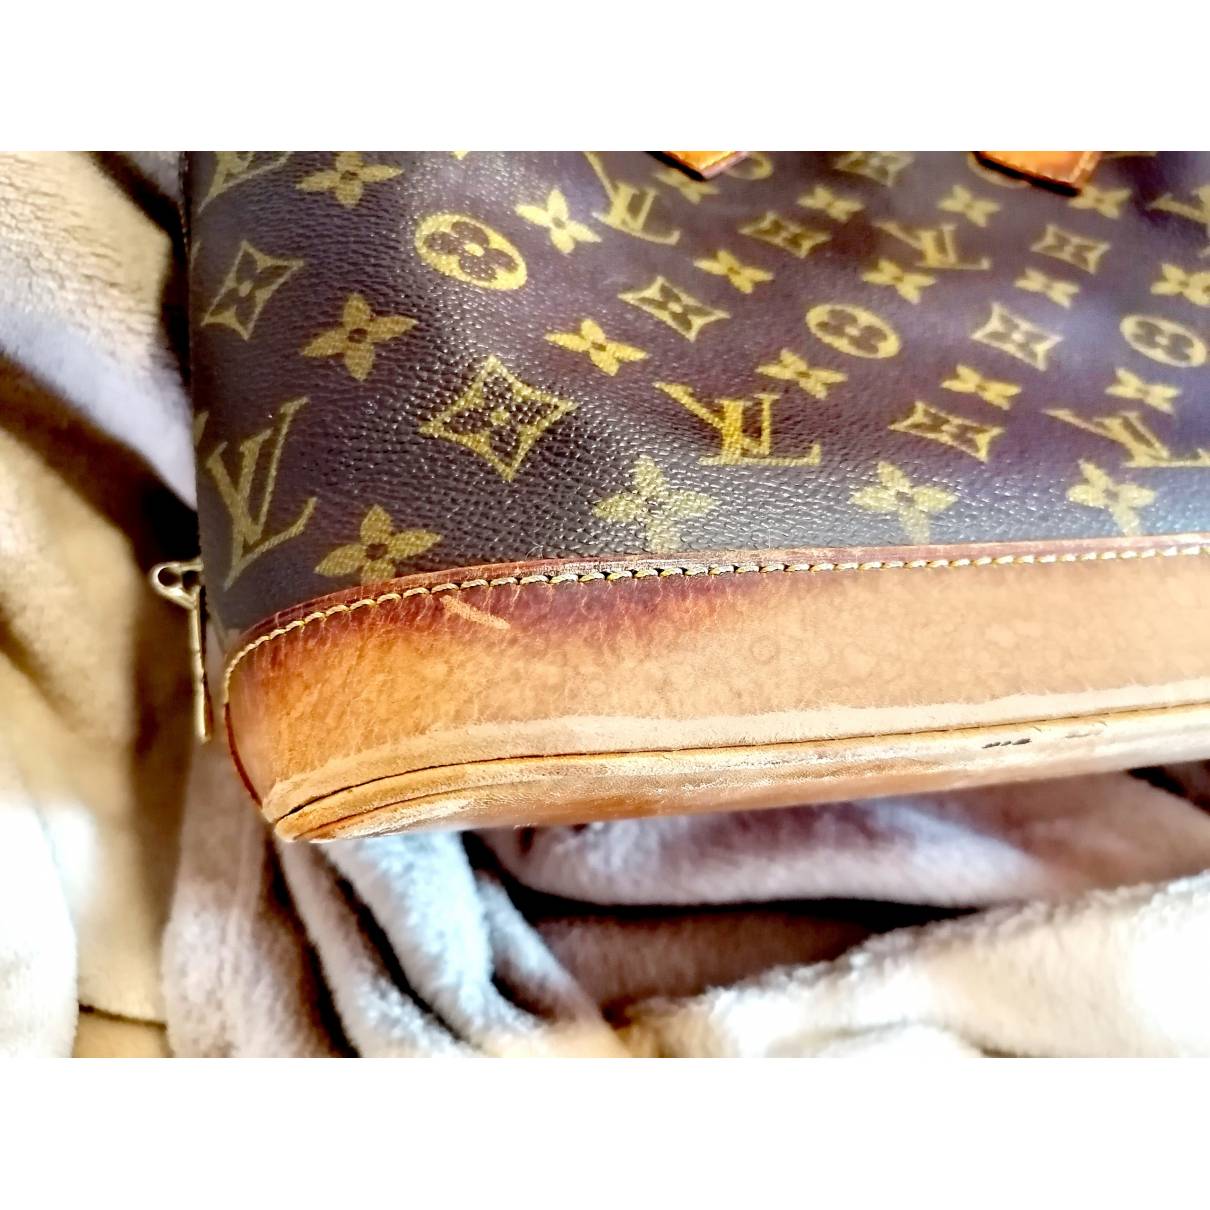 How long do LV bags last? Is the leather on the bag easily damaged